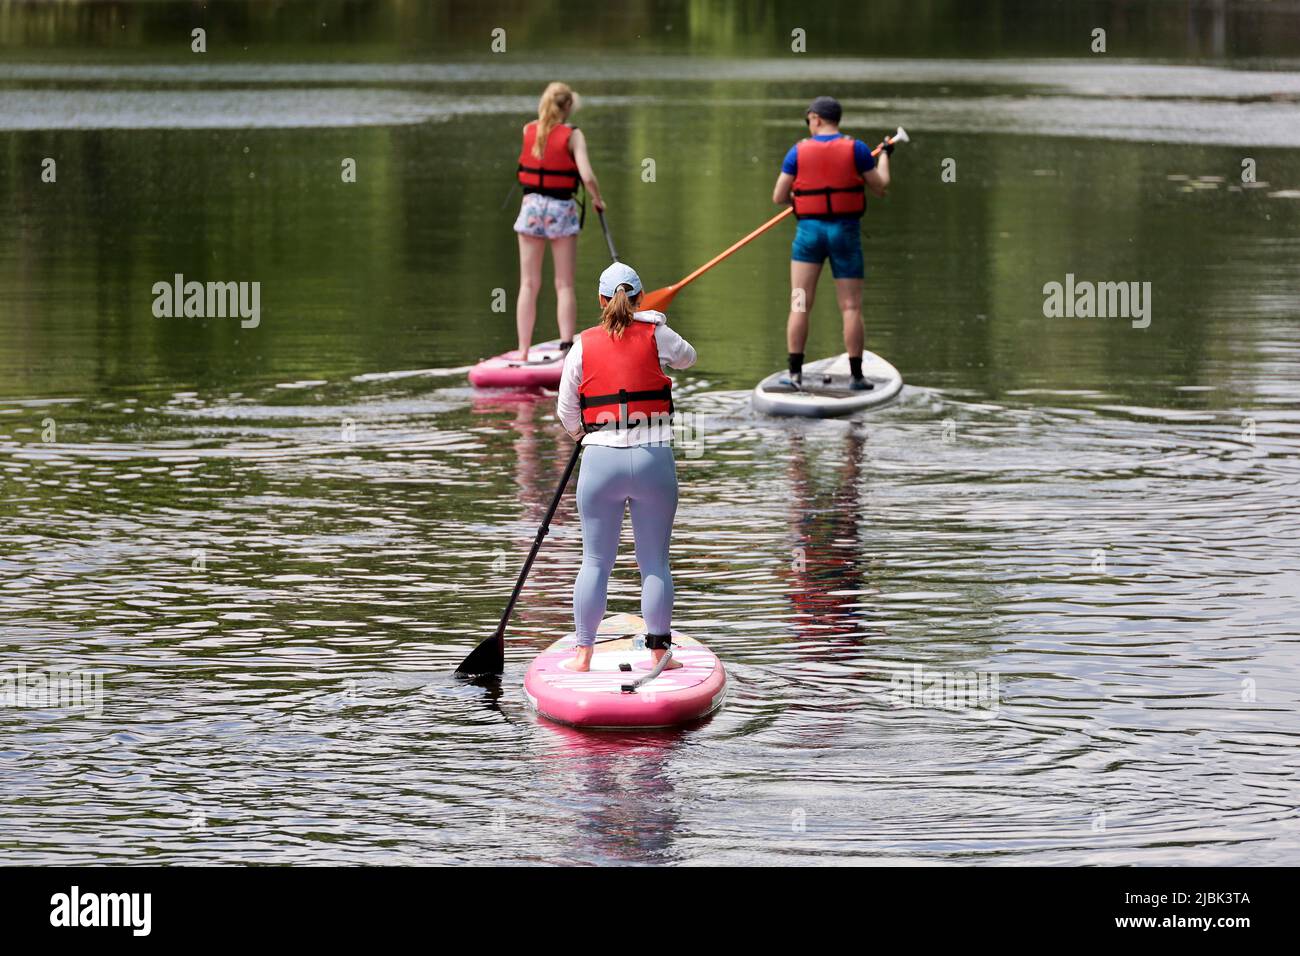 Sup surfing, young people with paddles sailing on a boards in river. Stand up paddle boarding in summer Stock Photo